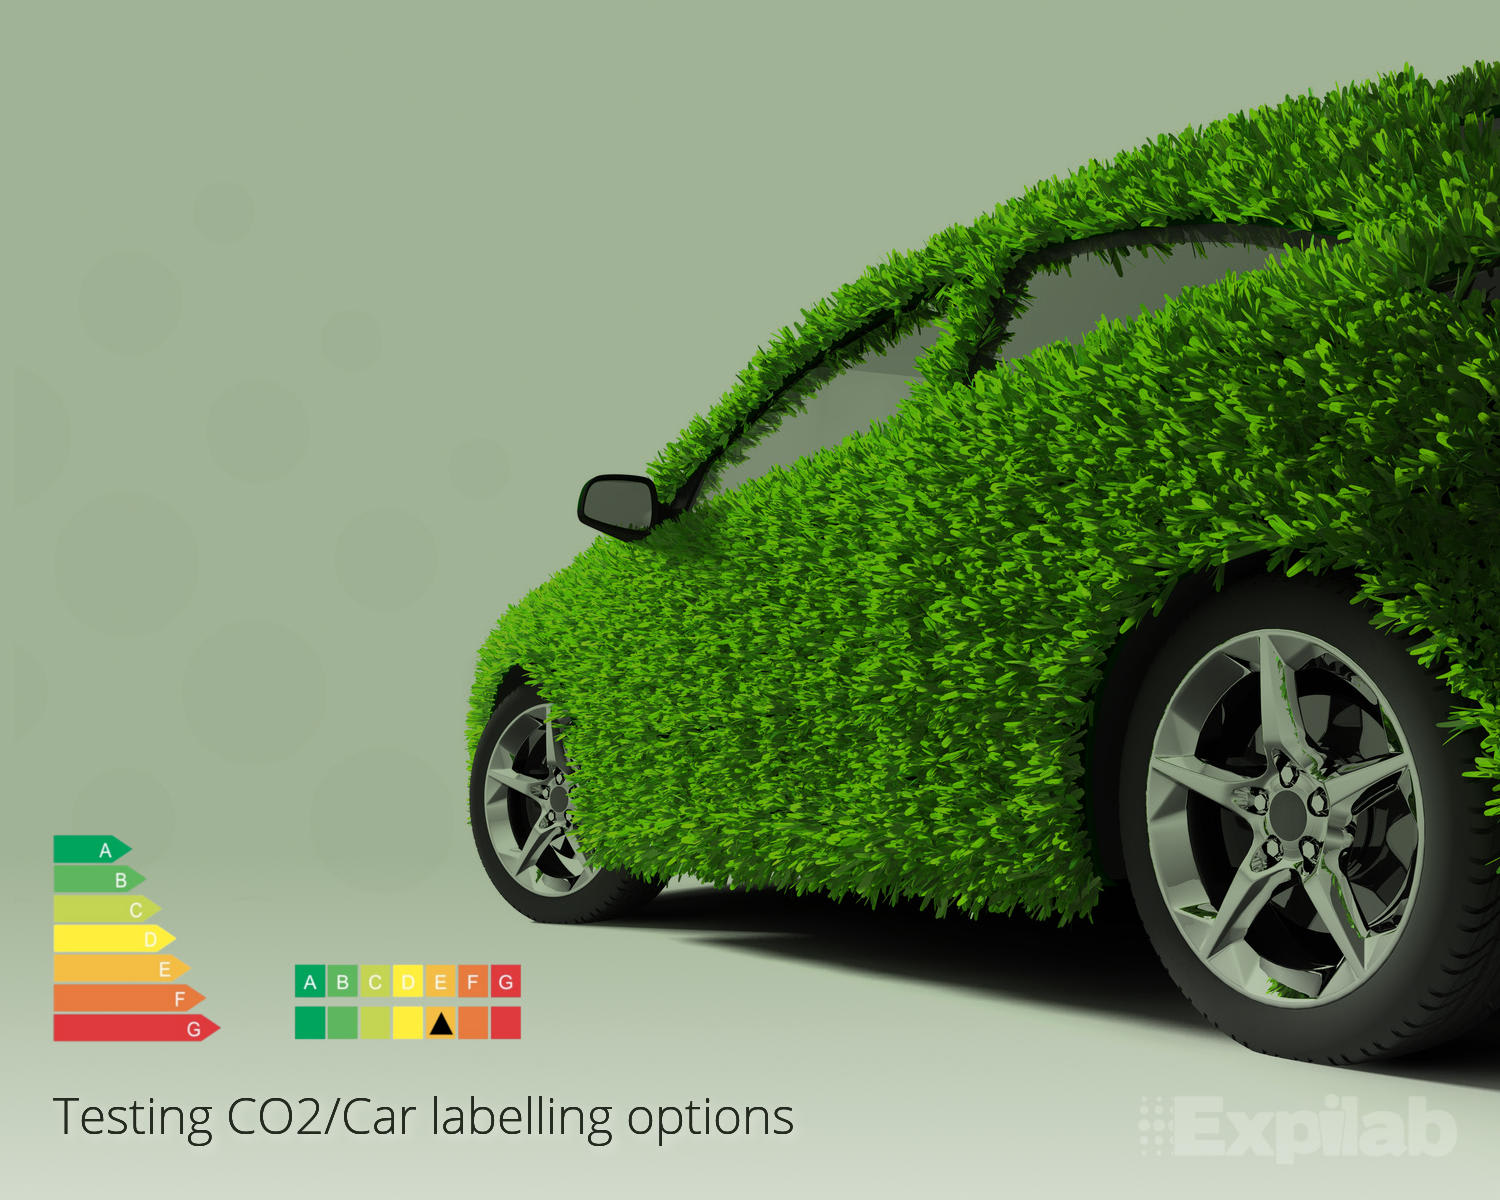 Testing CO2 / Car labelling options and consumer information